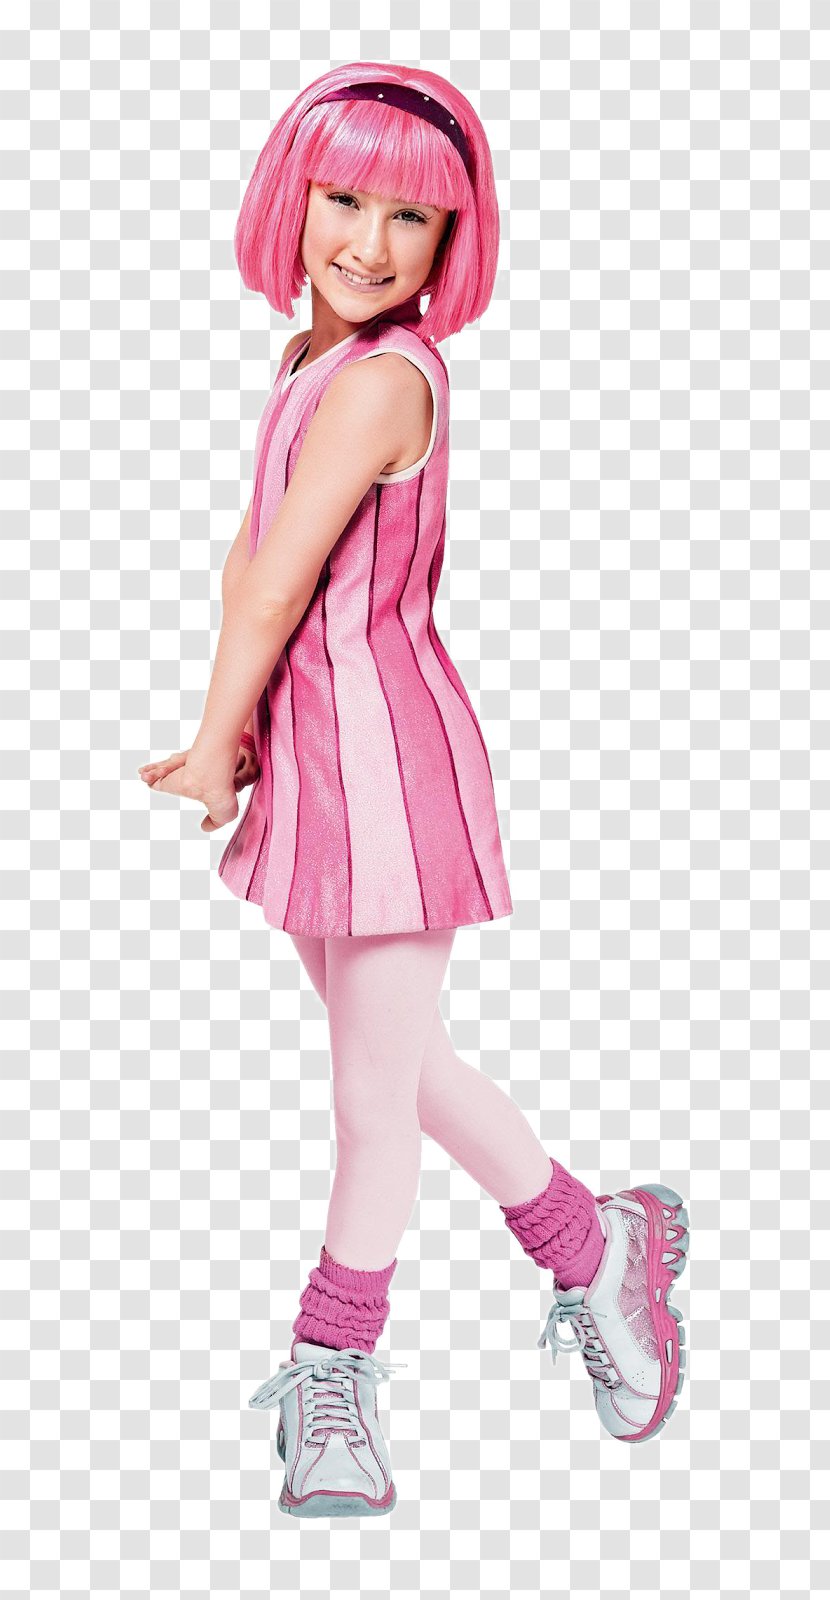 Julianna Rose Mauriello LazyTown Stephanie Television Show Children's Series - Watercolor - Lazytown Transparent PNG